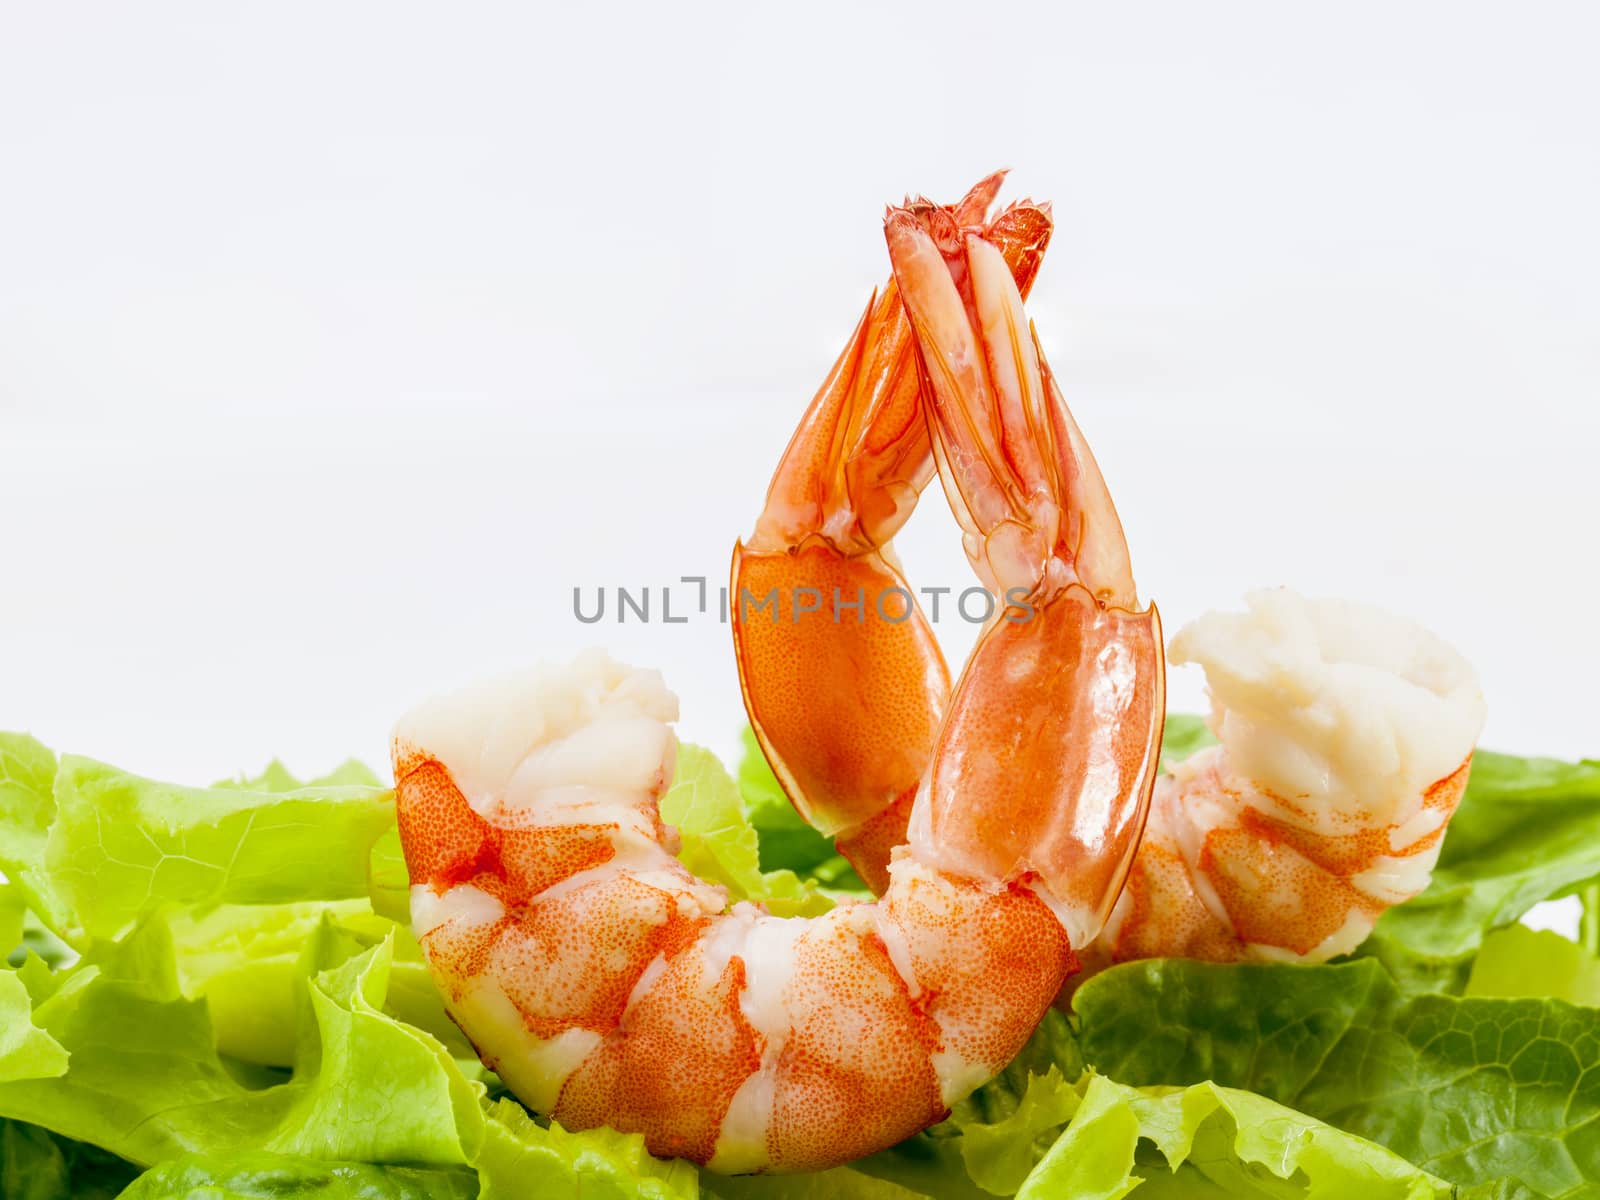 Mixed green salad with shrimps by kerdkanno